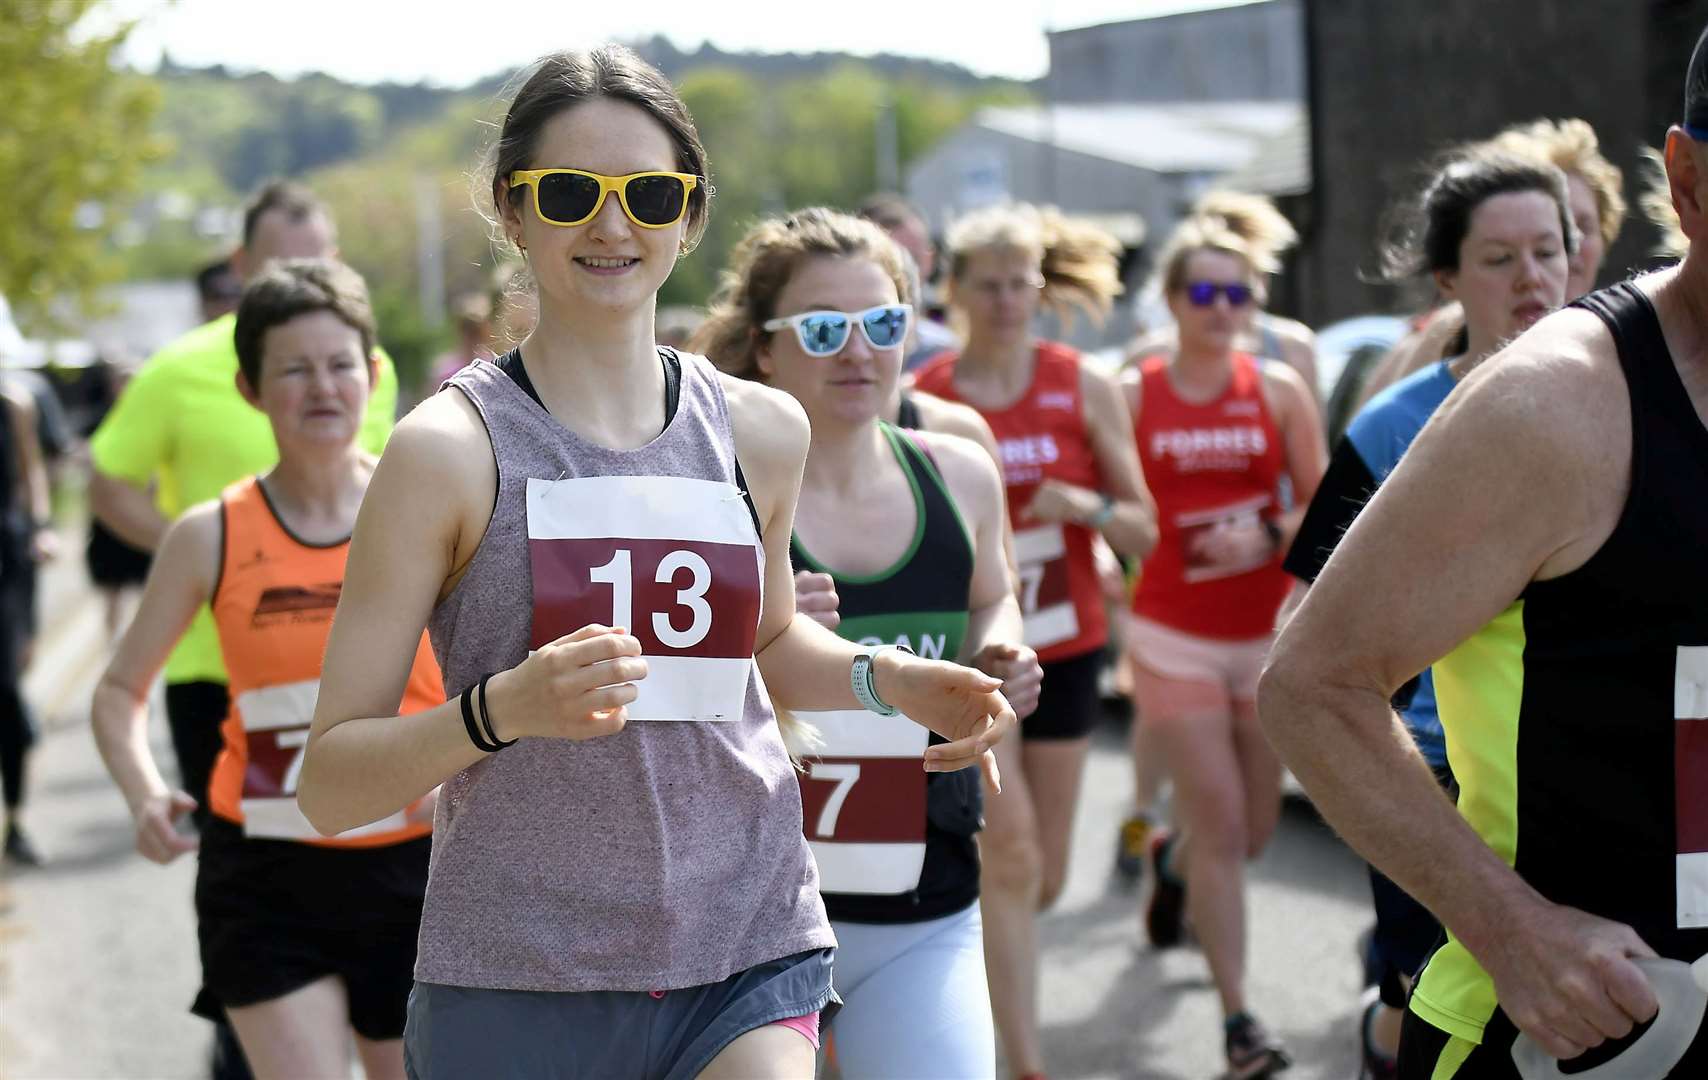 Samantha Marwick on a previous Forres Harriers Benromach 10k.